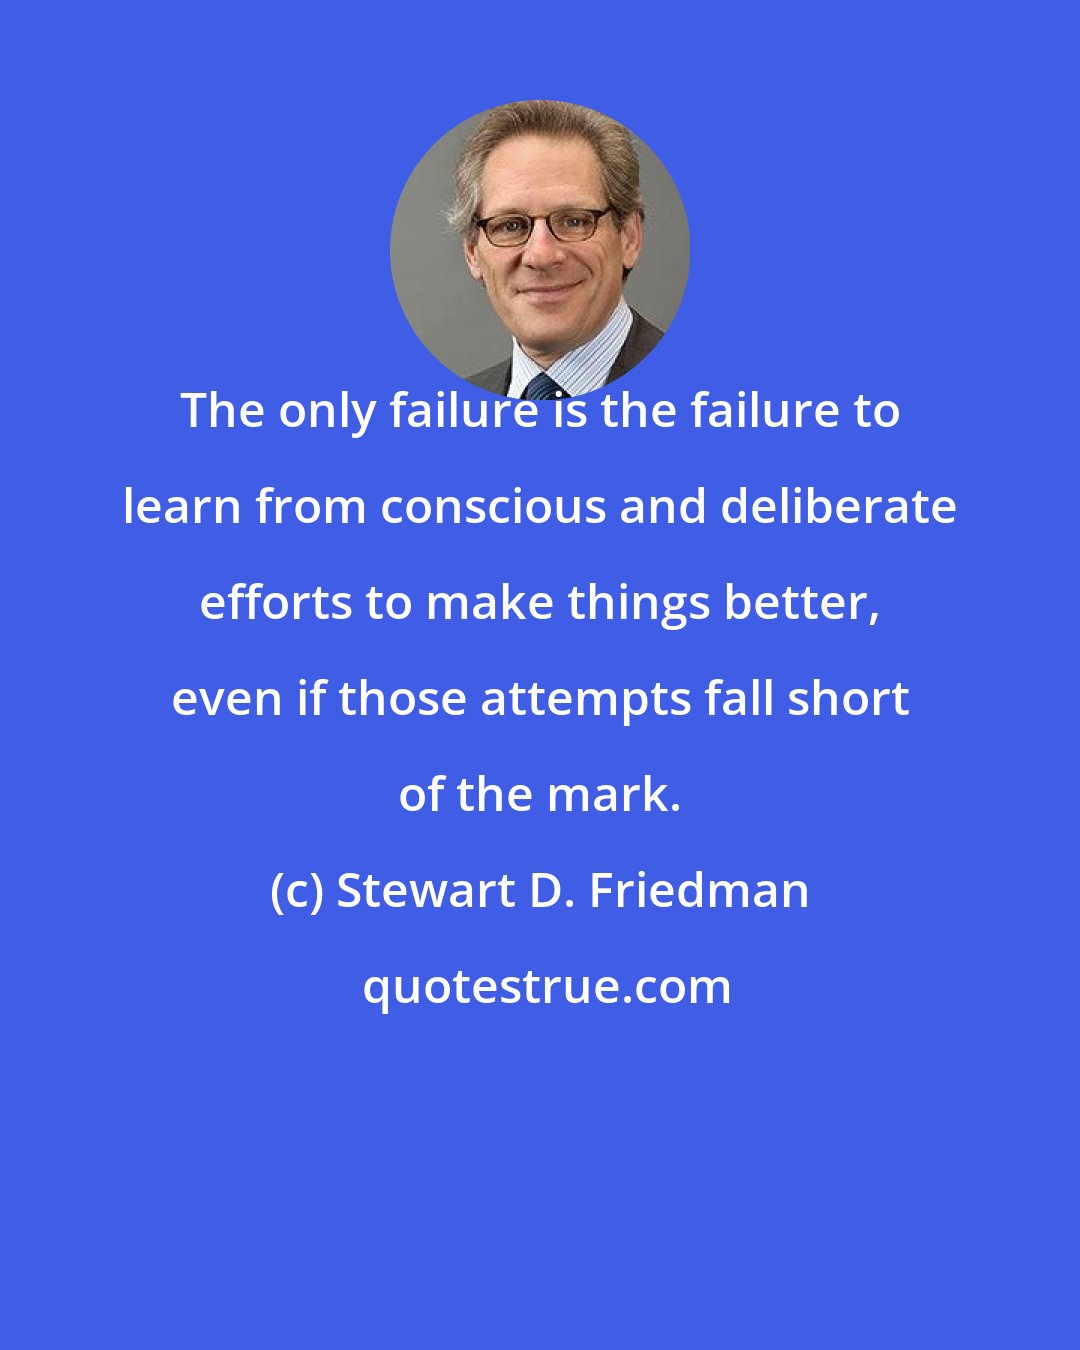 Stewart D. Friedman: The only failure is the failure to learn from conscious and deliberate efforts to make things better, even if those attempts fall short of the mark.